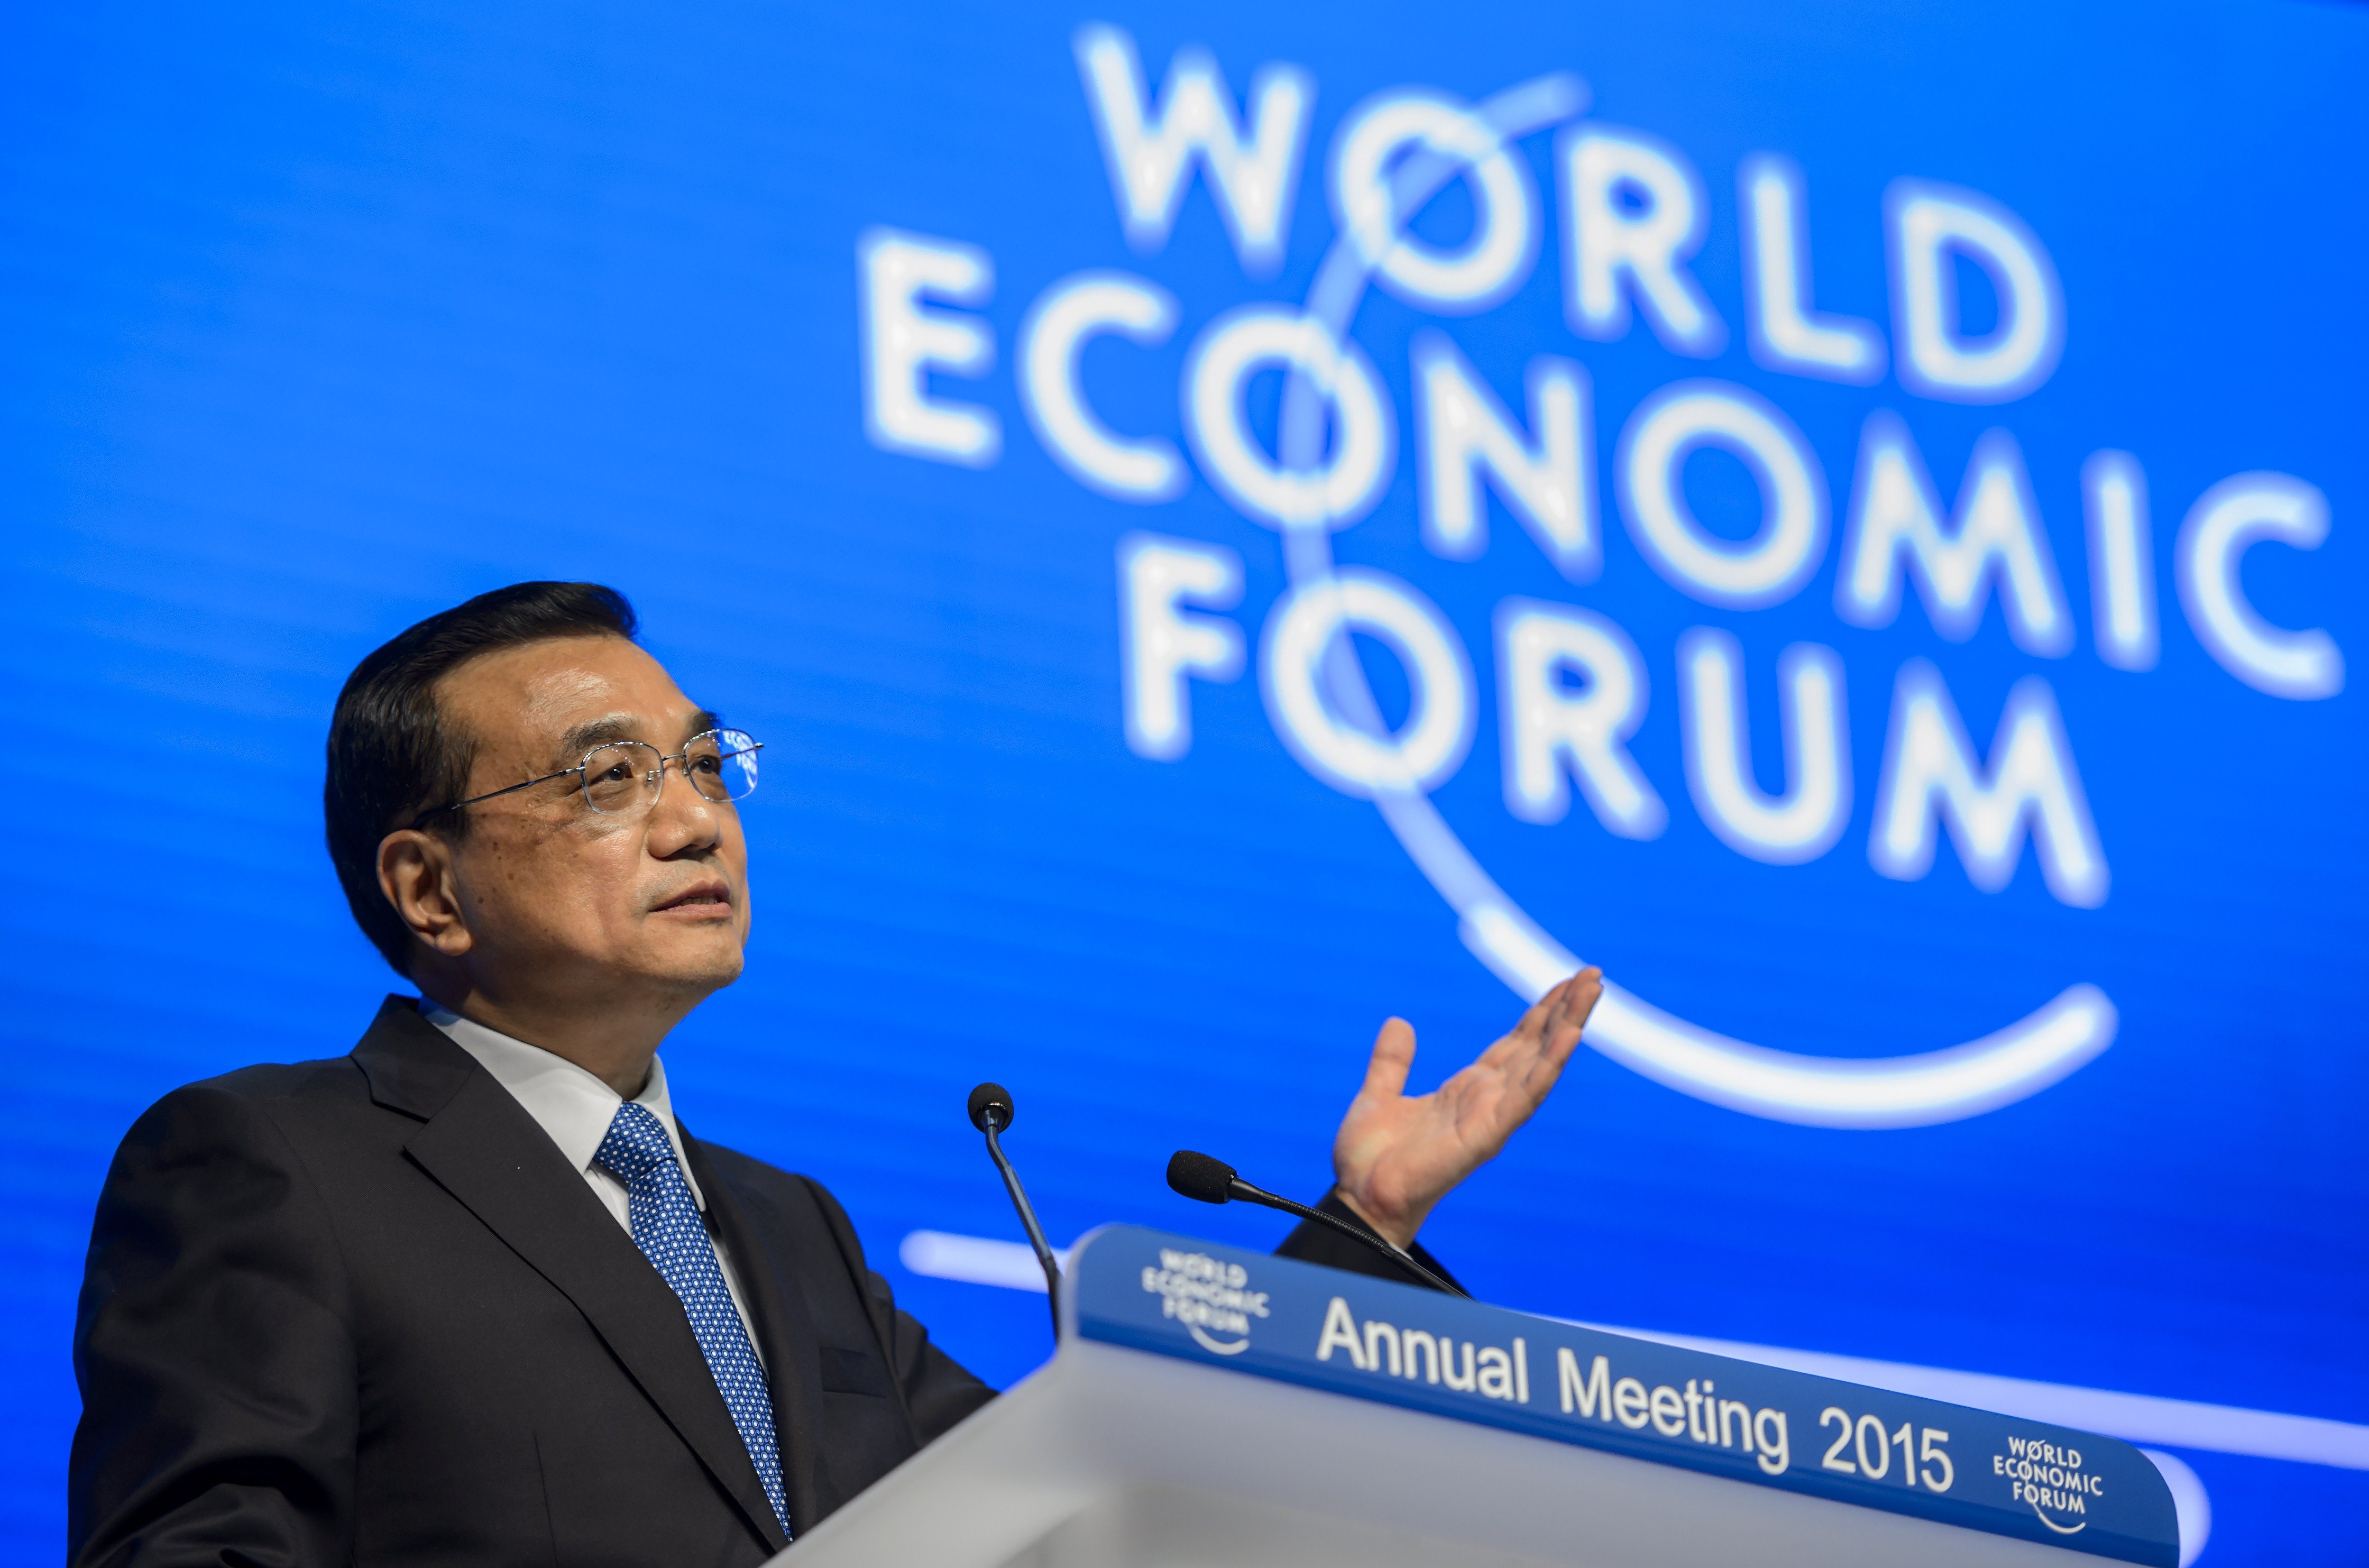 Chinese Premier Li Keqiang attends a session of the World Economic Forum (WEF) annual meeting on Jan. 21, 2015 in Davos, Switzerland. (Farice Coffrini—AFP/Getty Images)